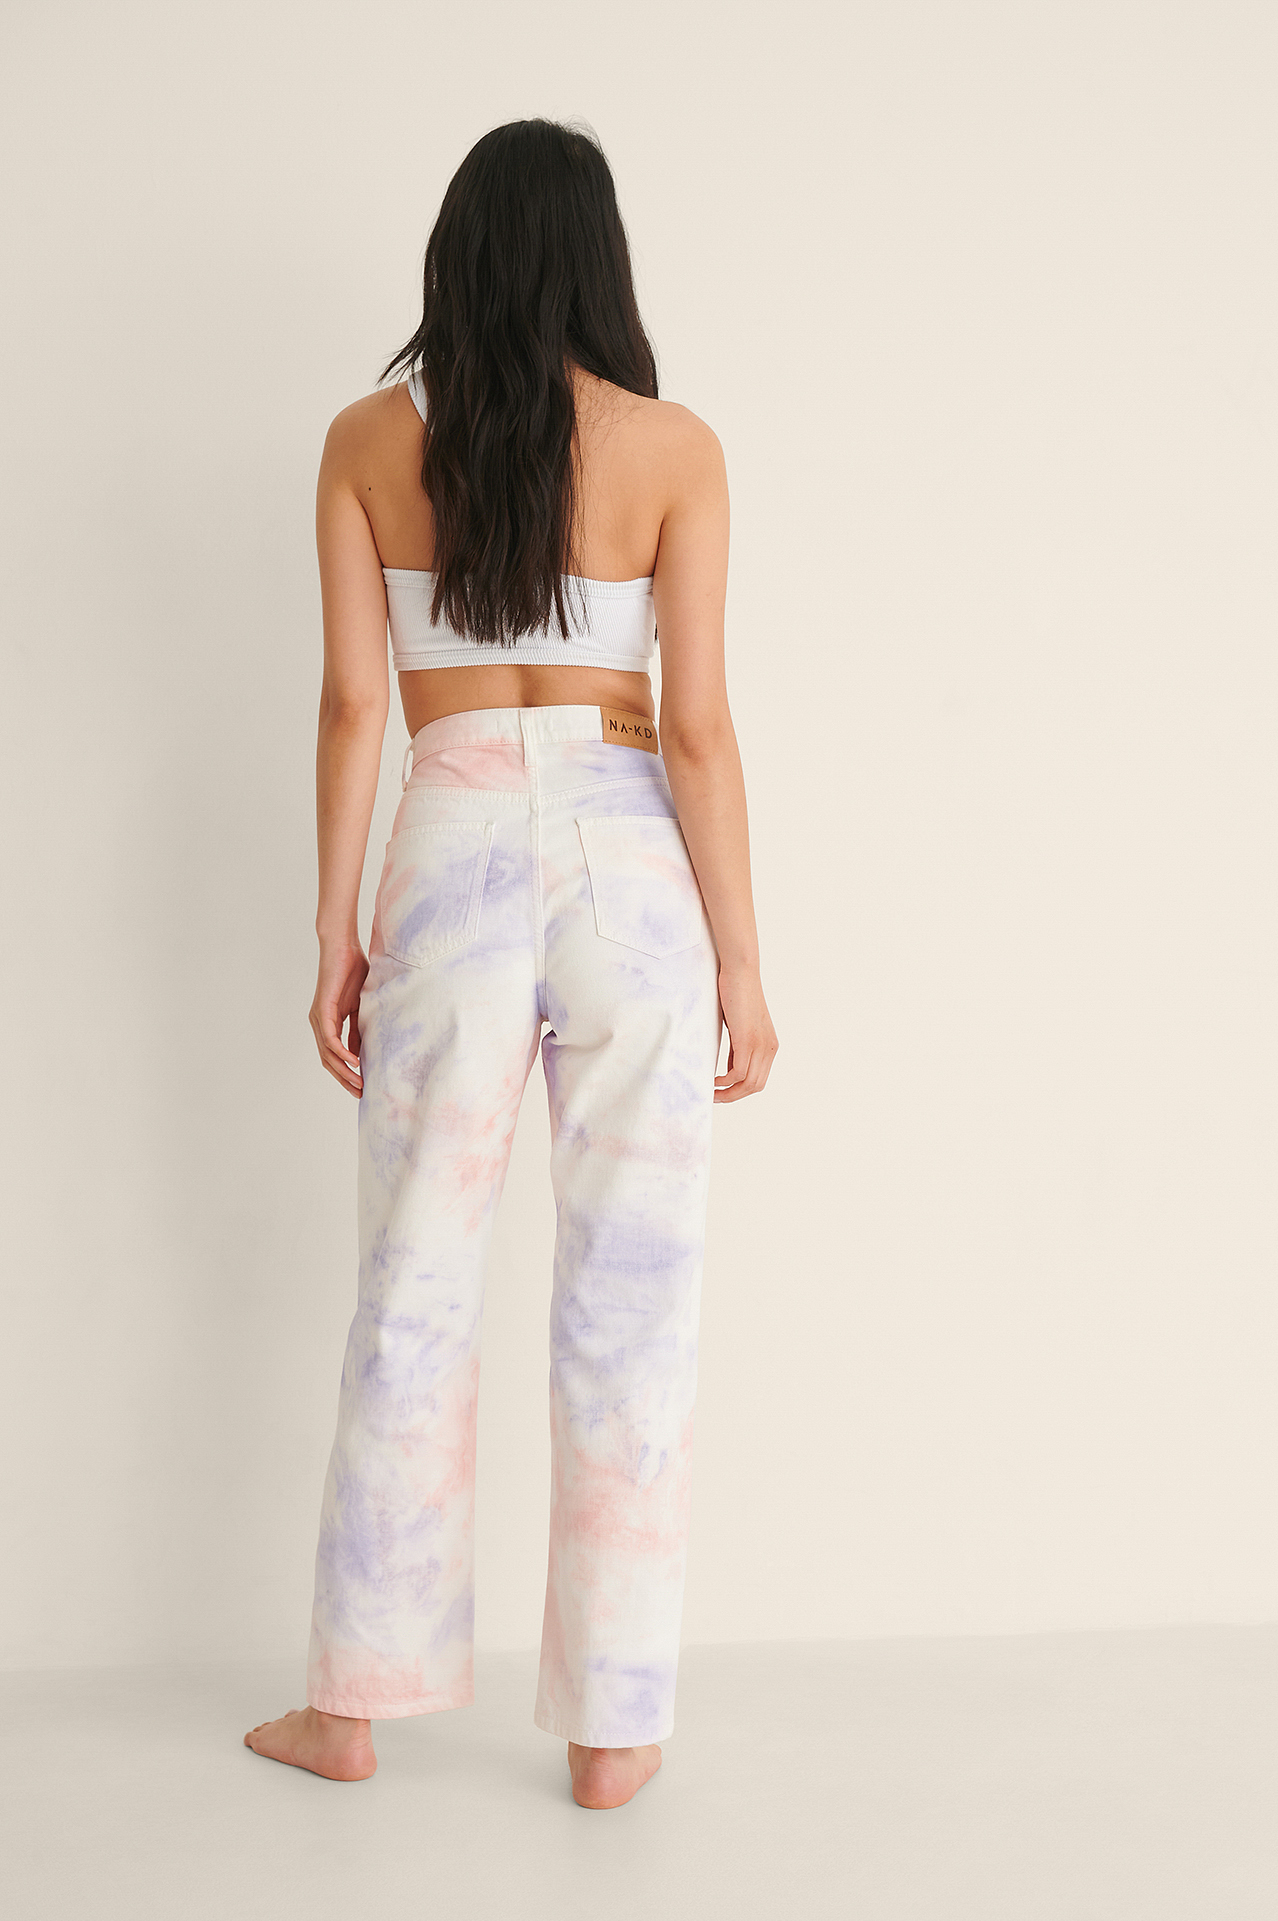 Tie Die Straight High Waist Jeans Outfit.